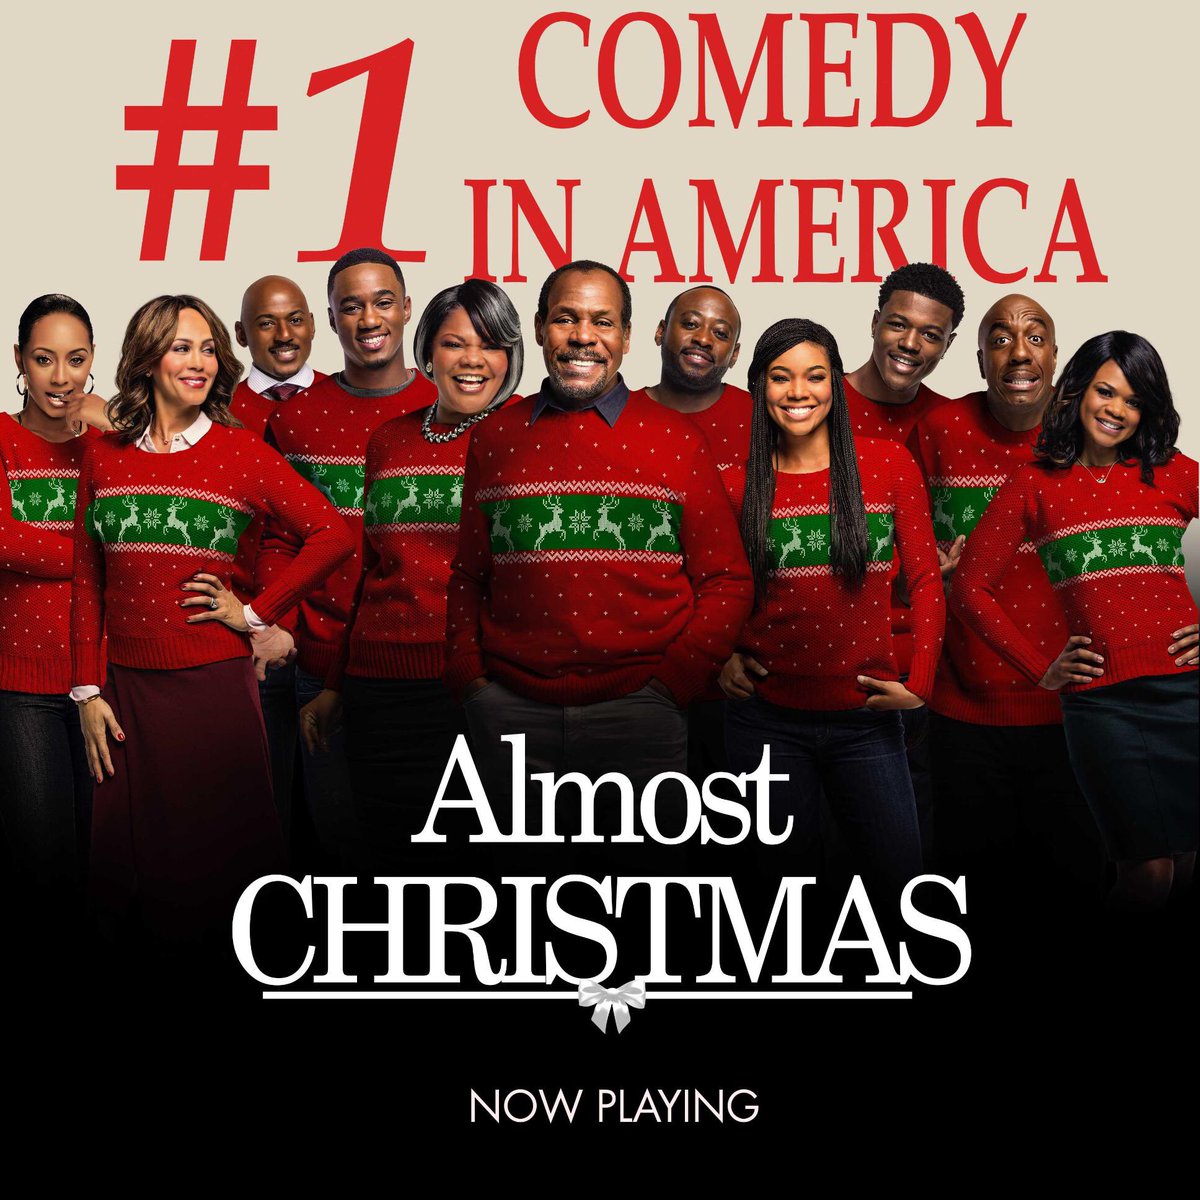 RT @DavidETalbert: Wow!! @AlmostChristmas !! 2 weeks as the #1 comedy in America!! #wonthedoit ???????????????????????????????????????? RT https://t.co/sOPxN9Ty96